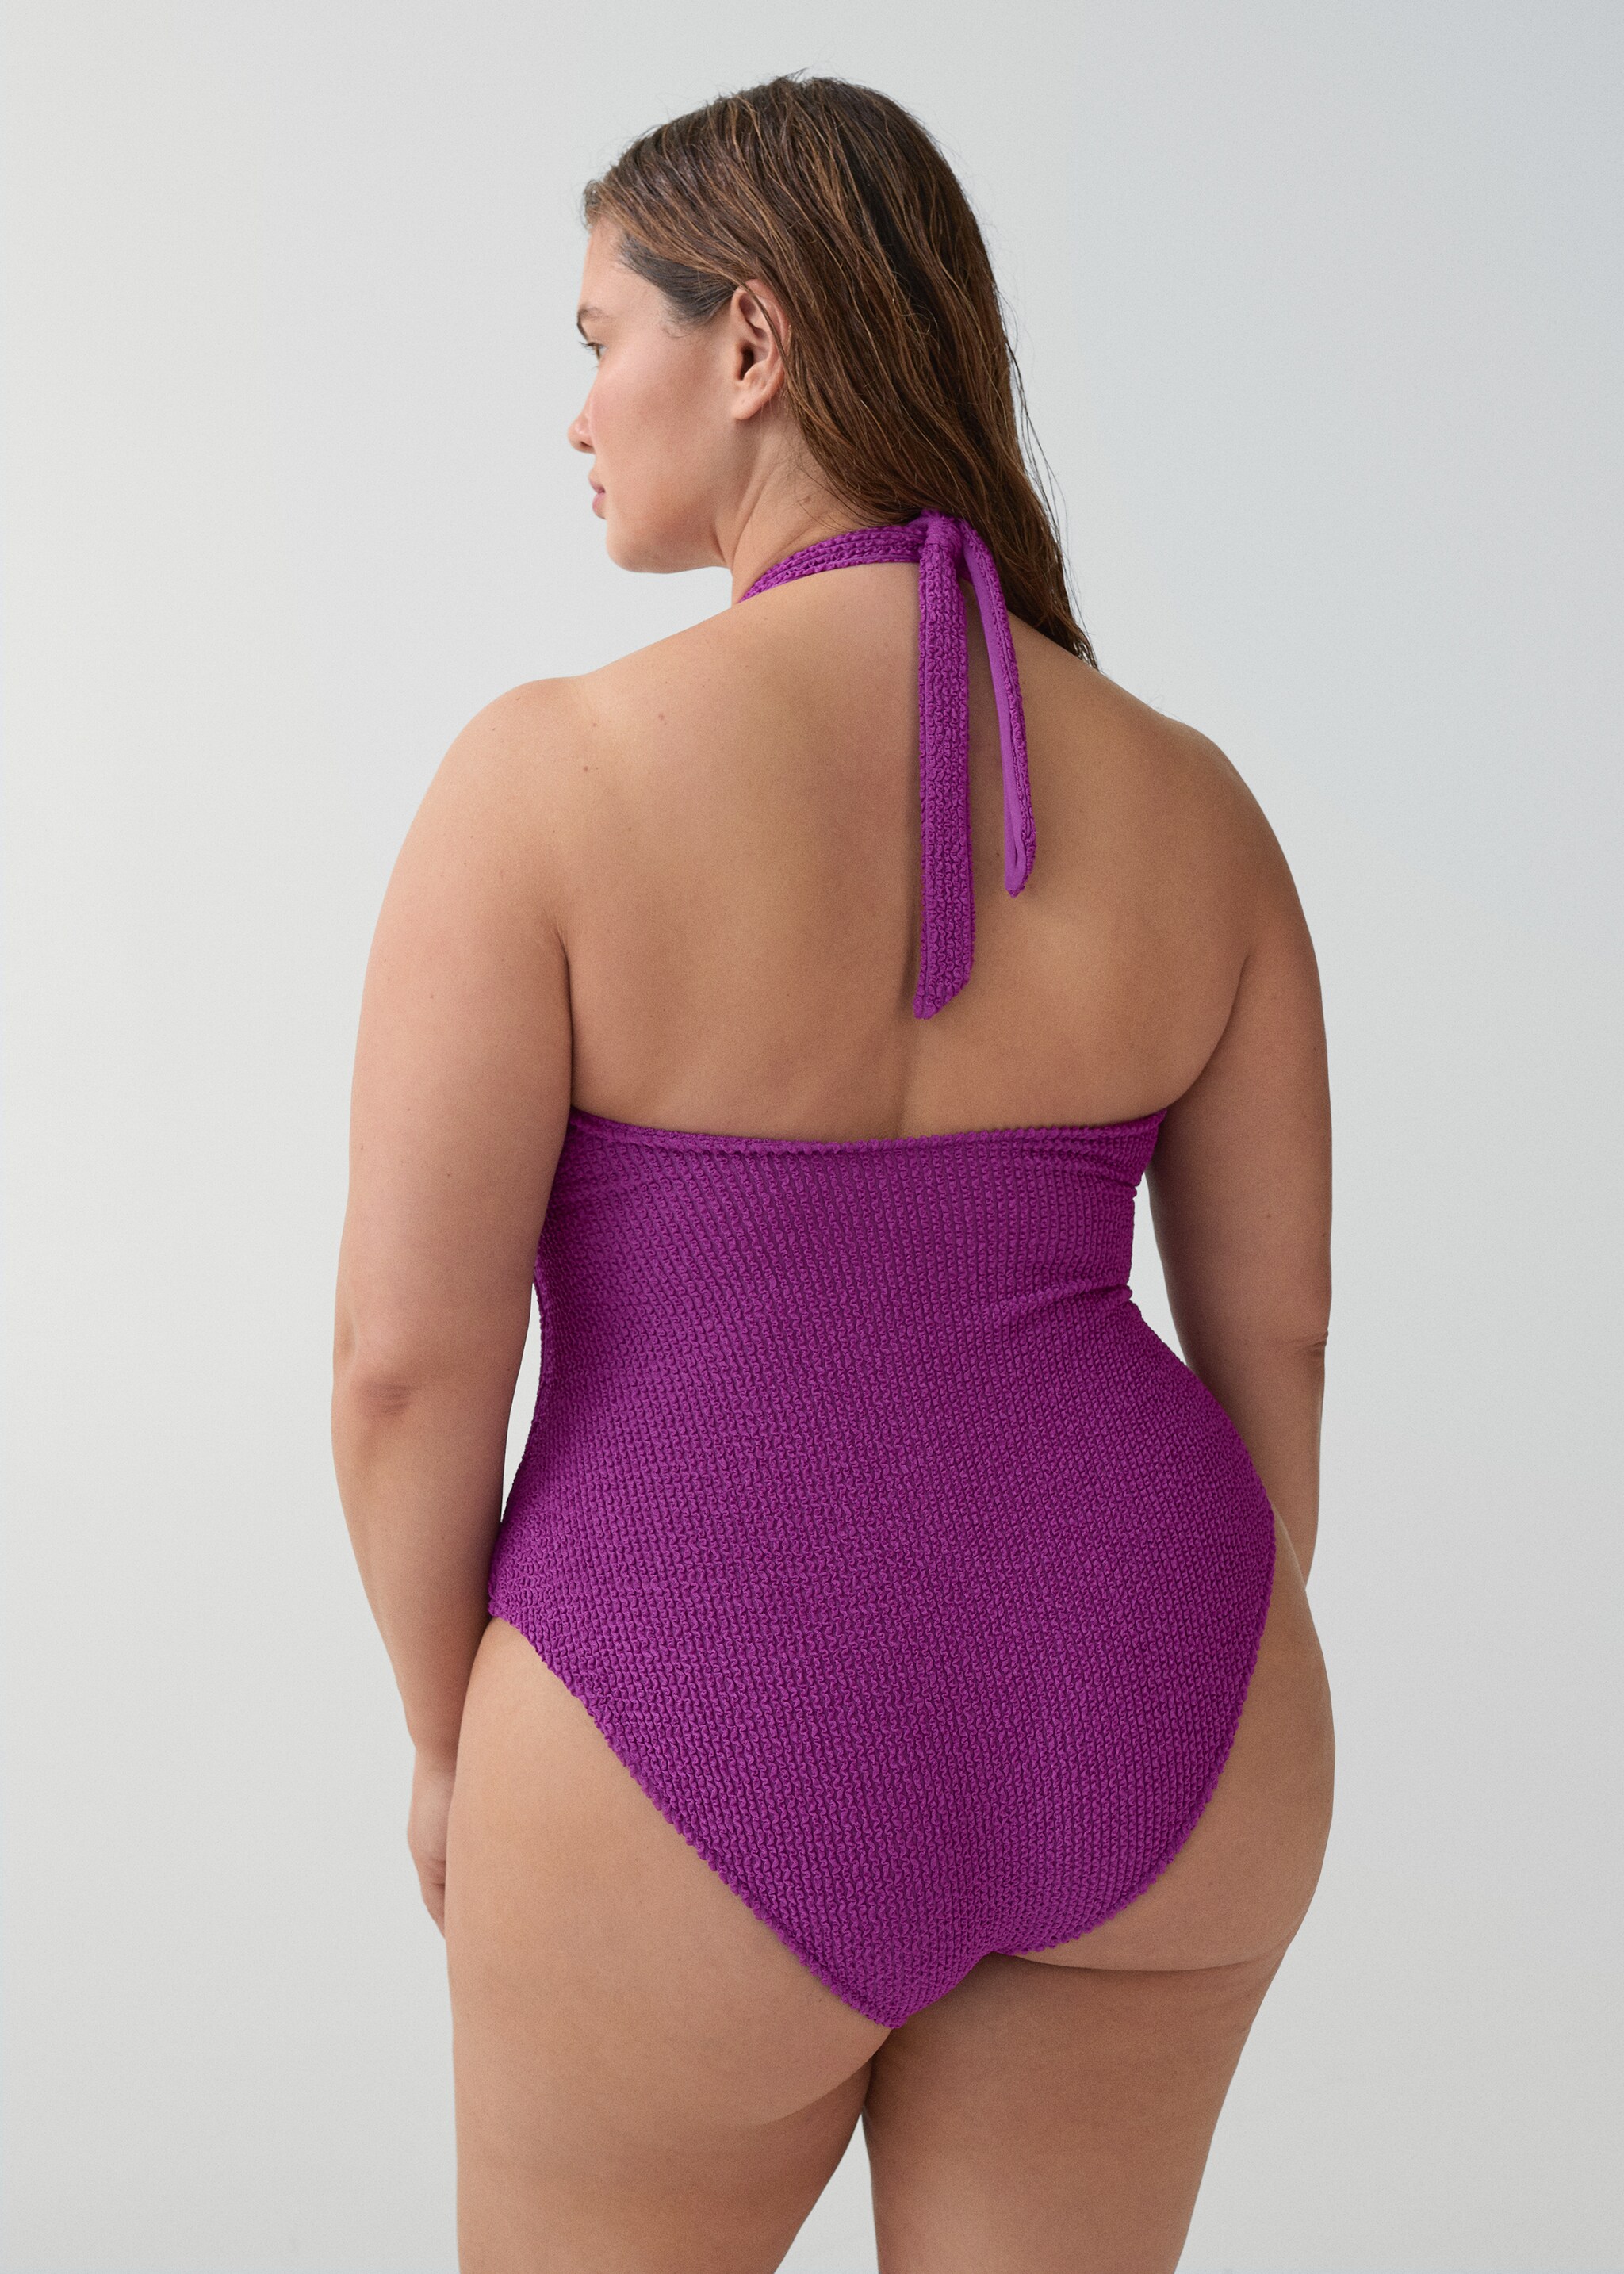 Halter neck swimsuit - Details of the article 4